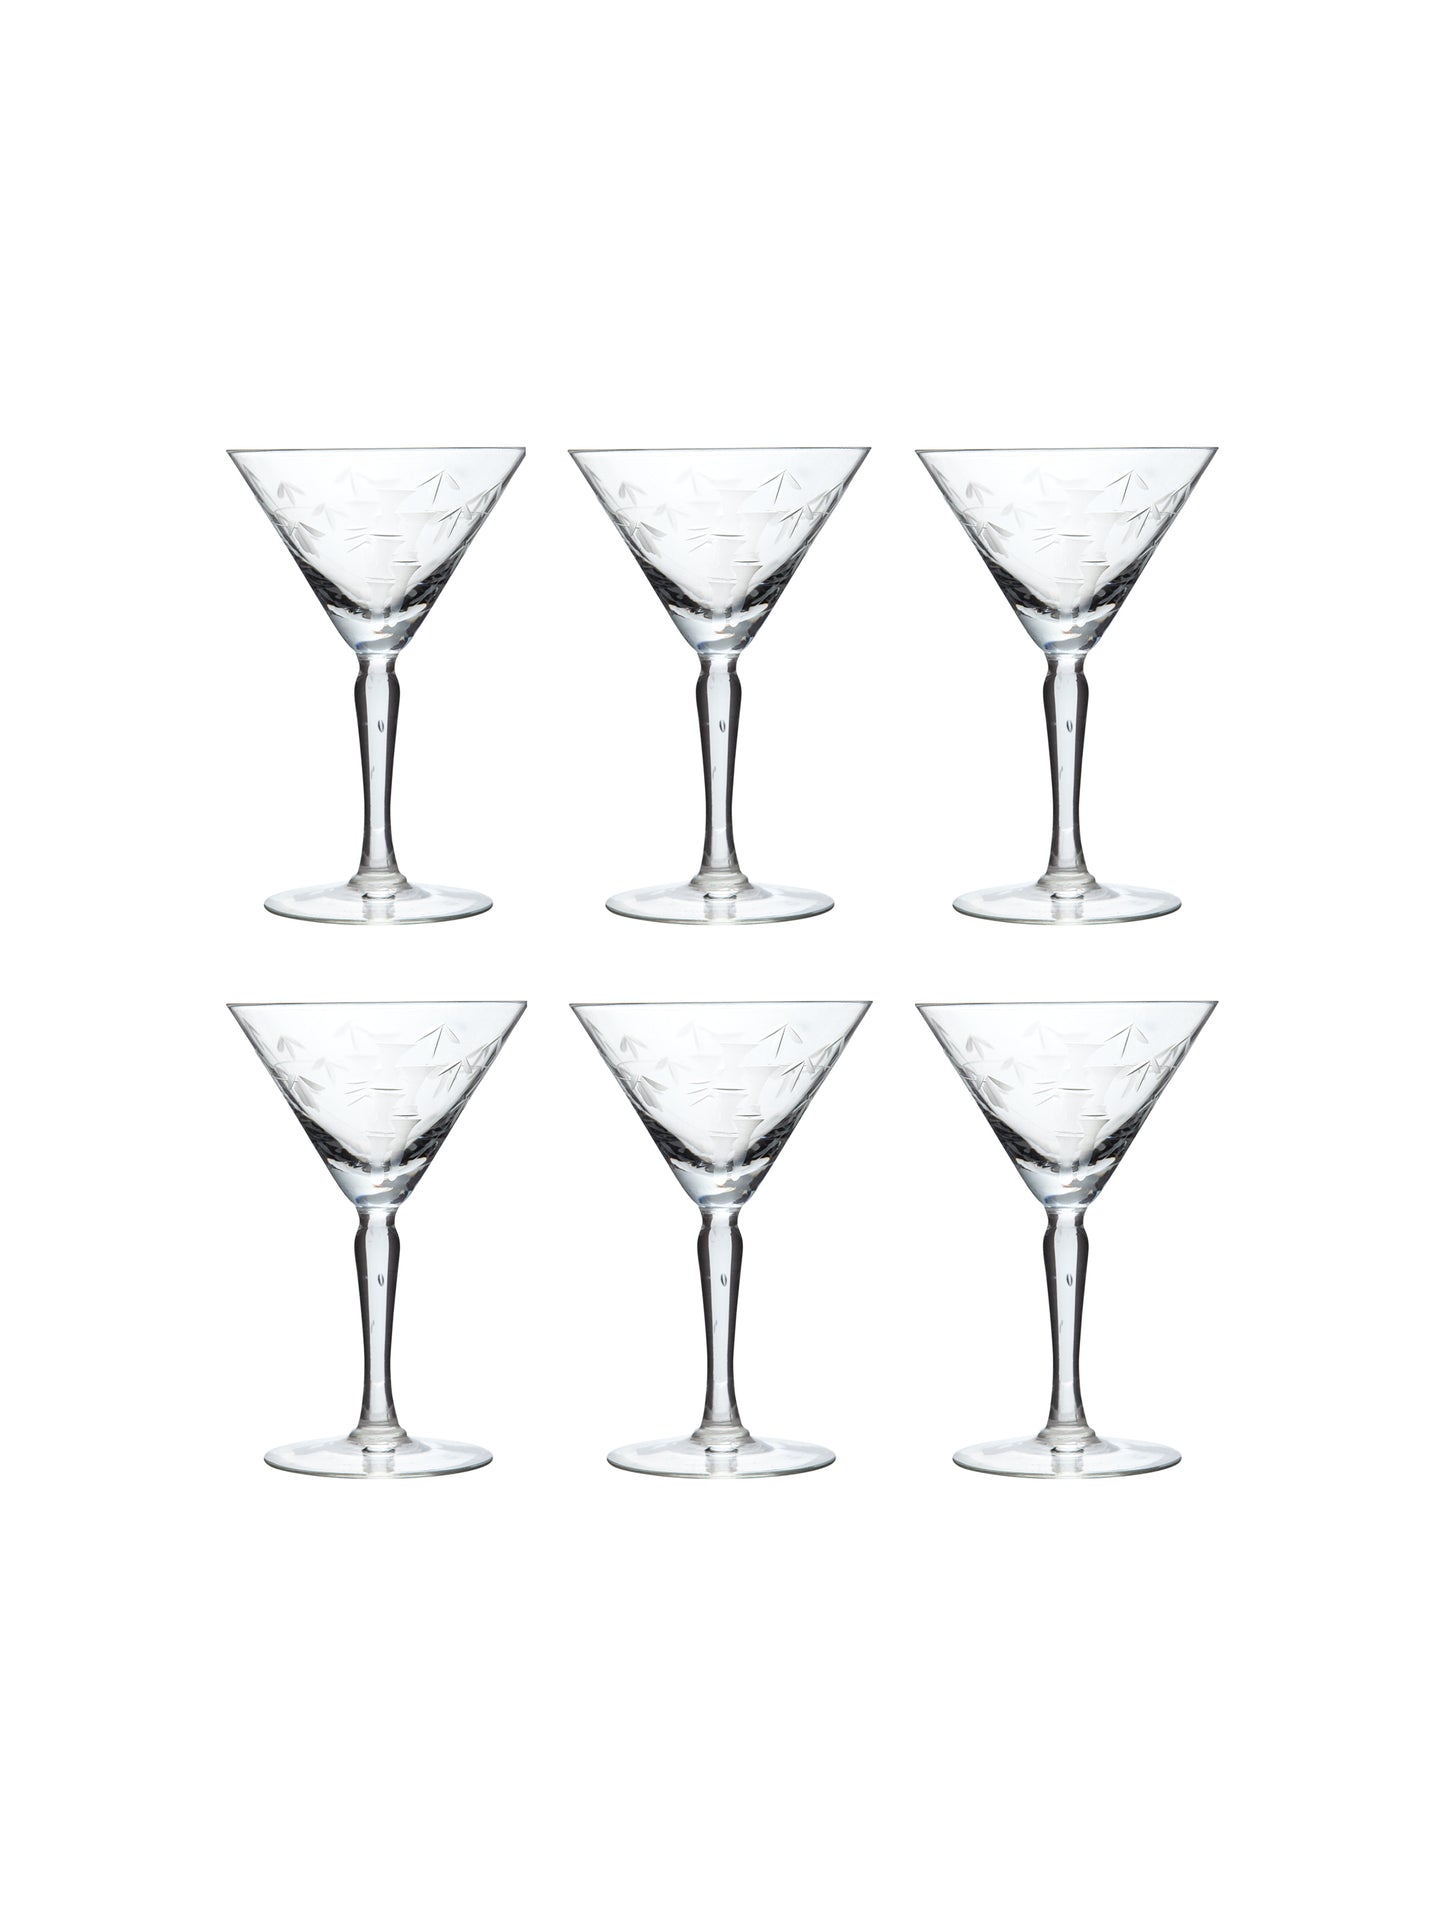 Shop the Vintage Japanese Bamboo Etched Martini Glasses at Weston